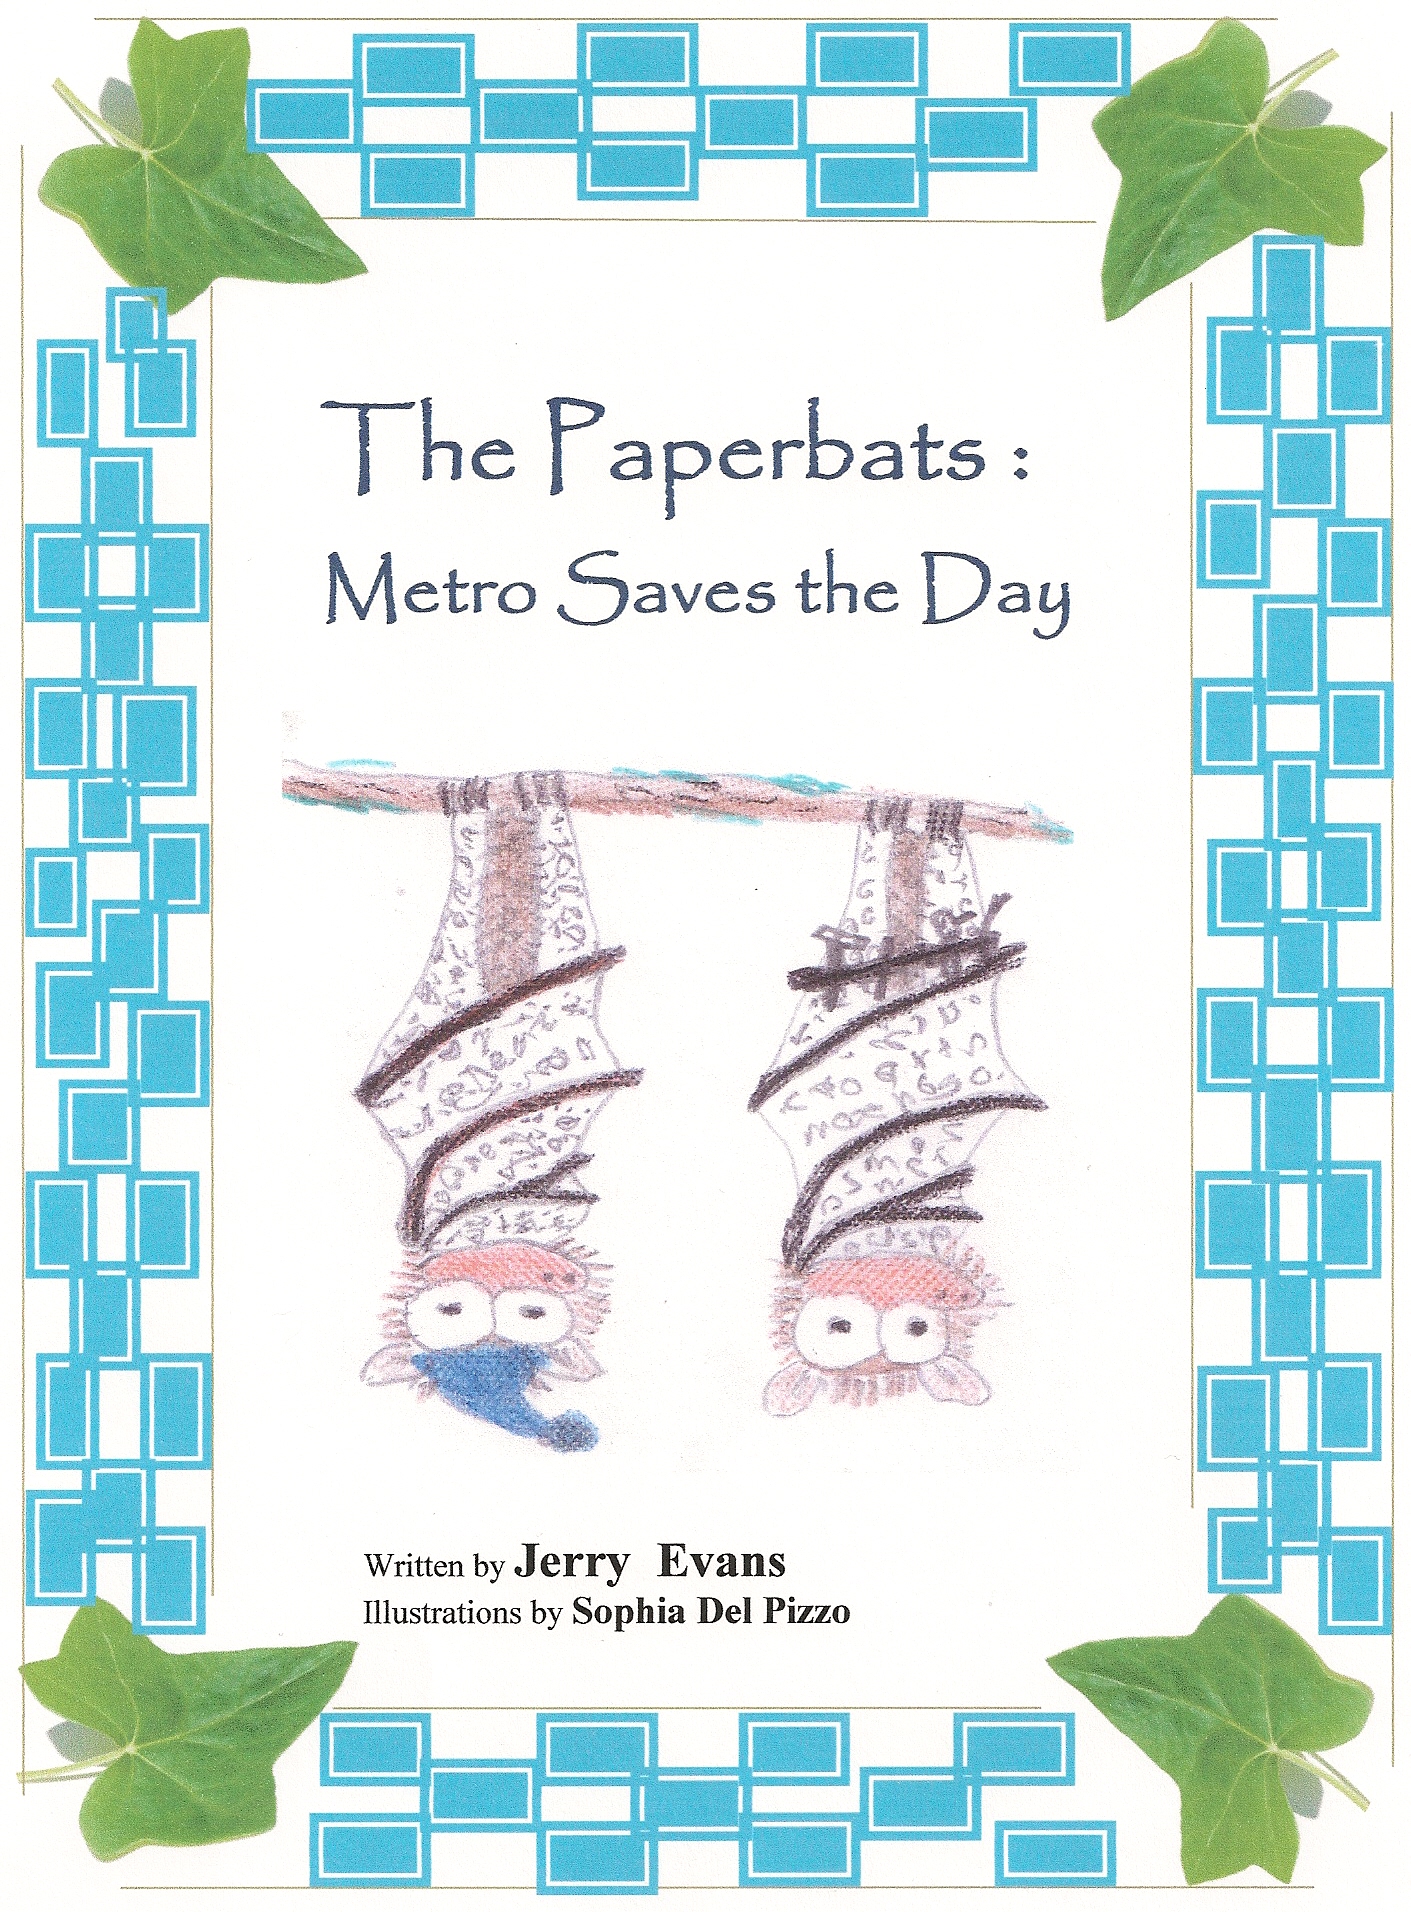 Paperbats 2: Metro Saves the Day